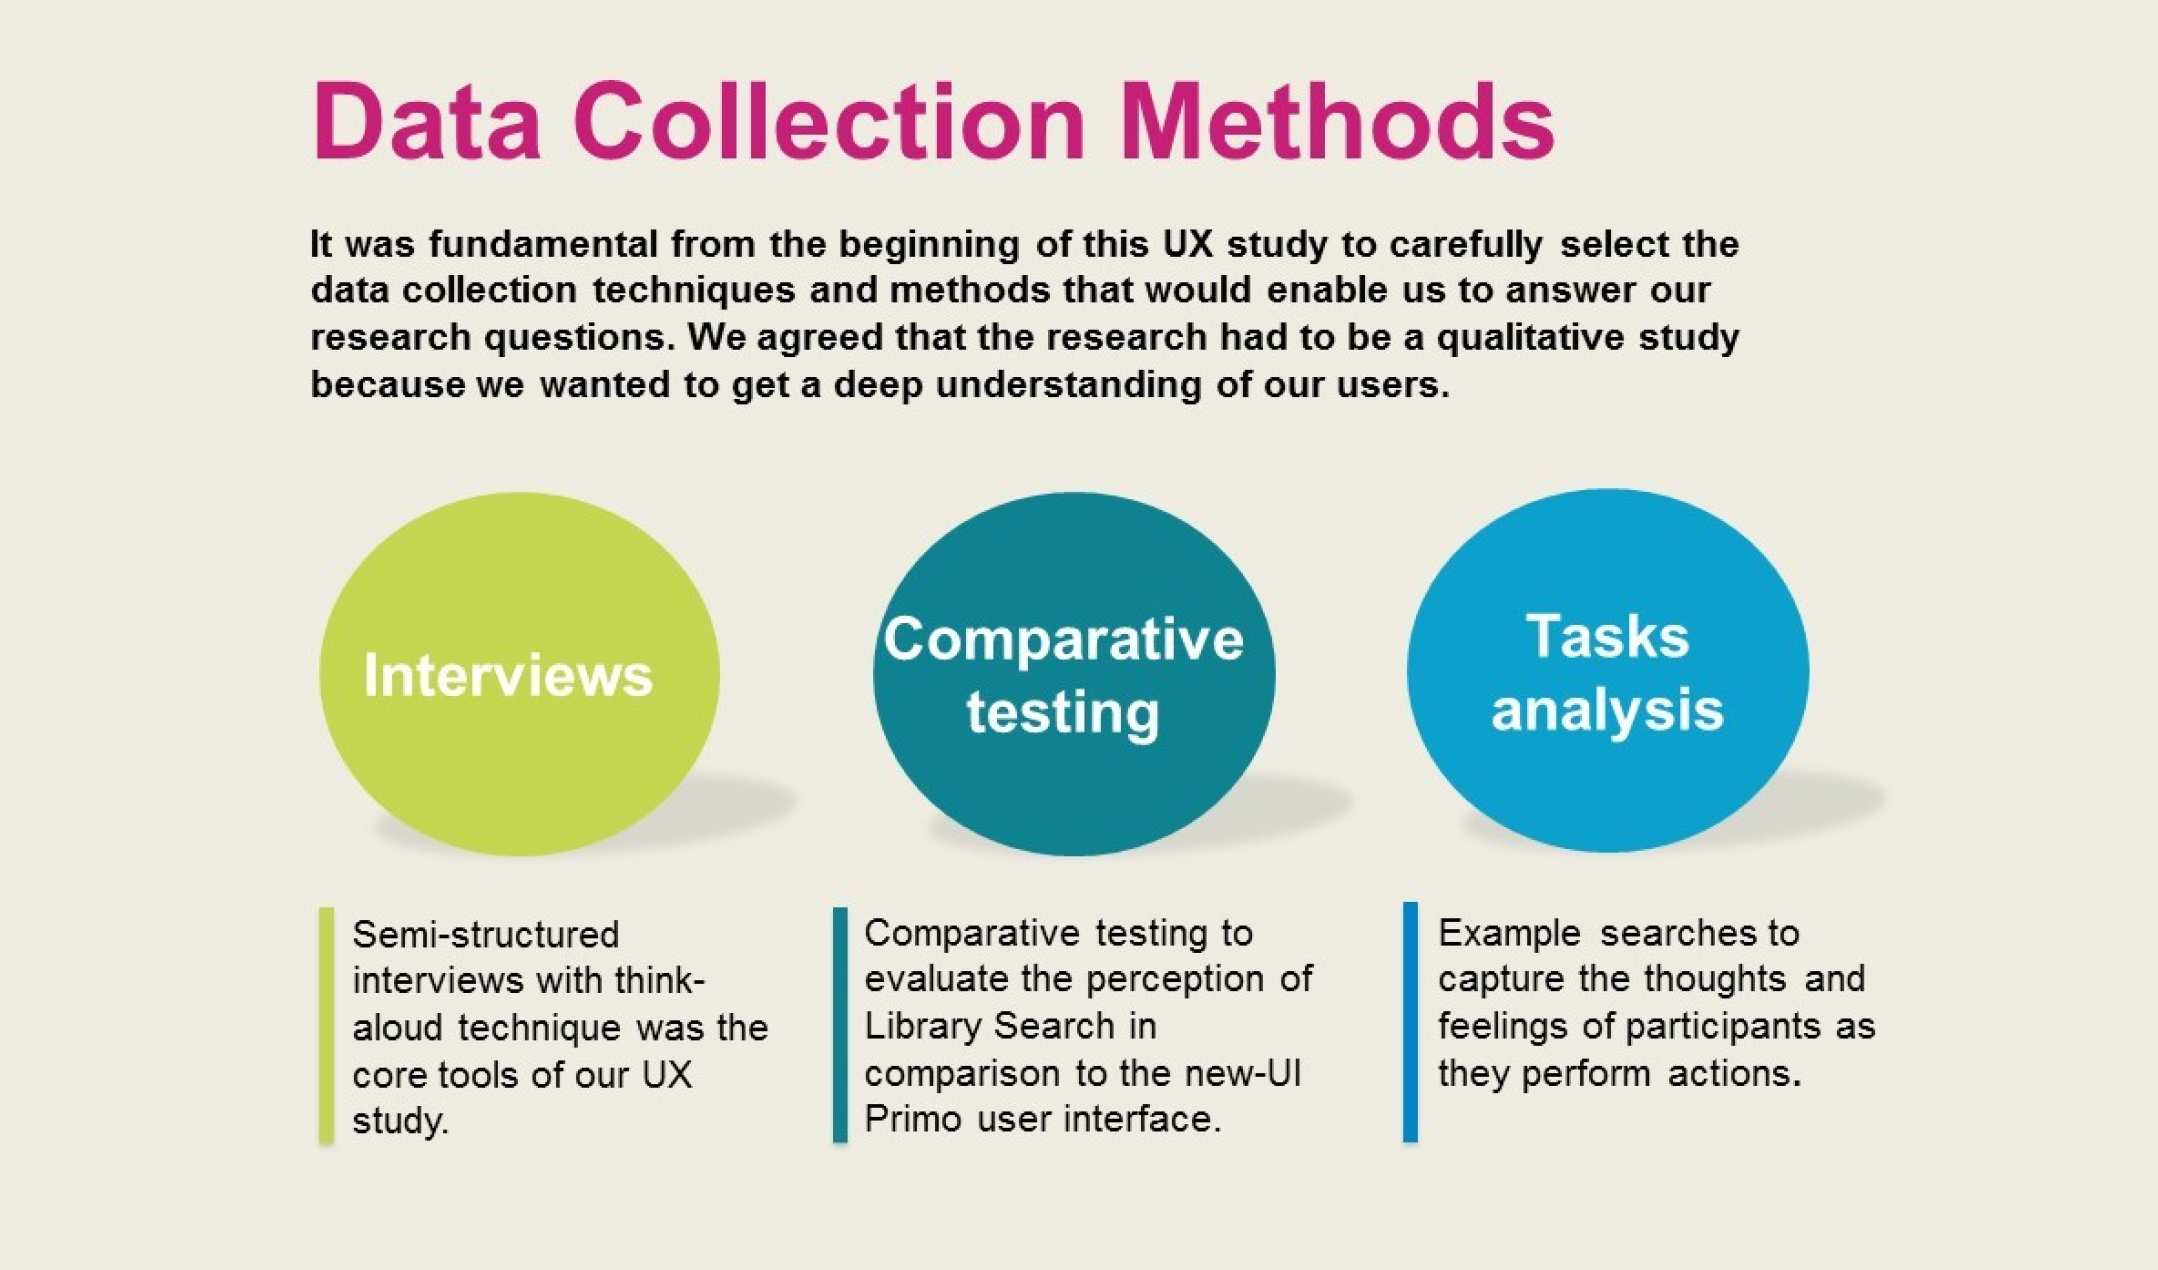 a case study method of data collection suitable for